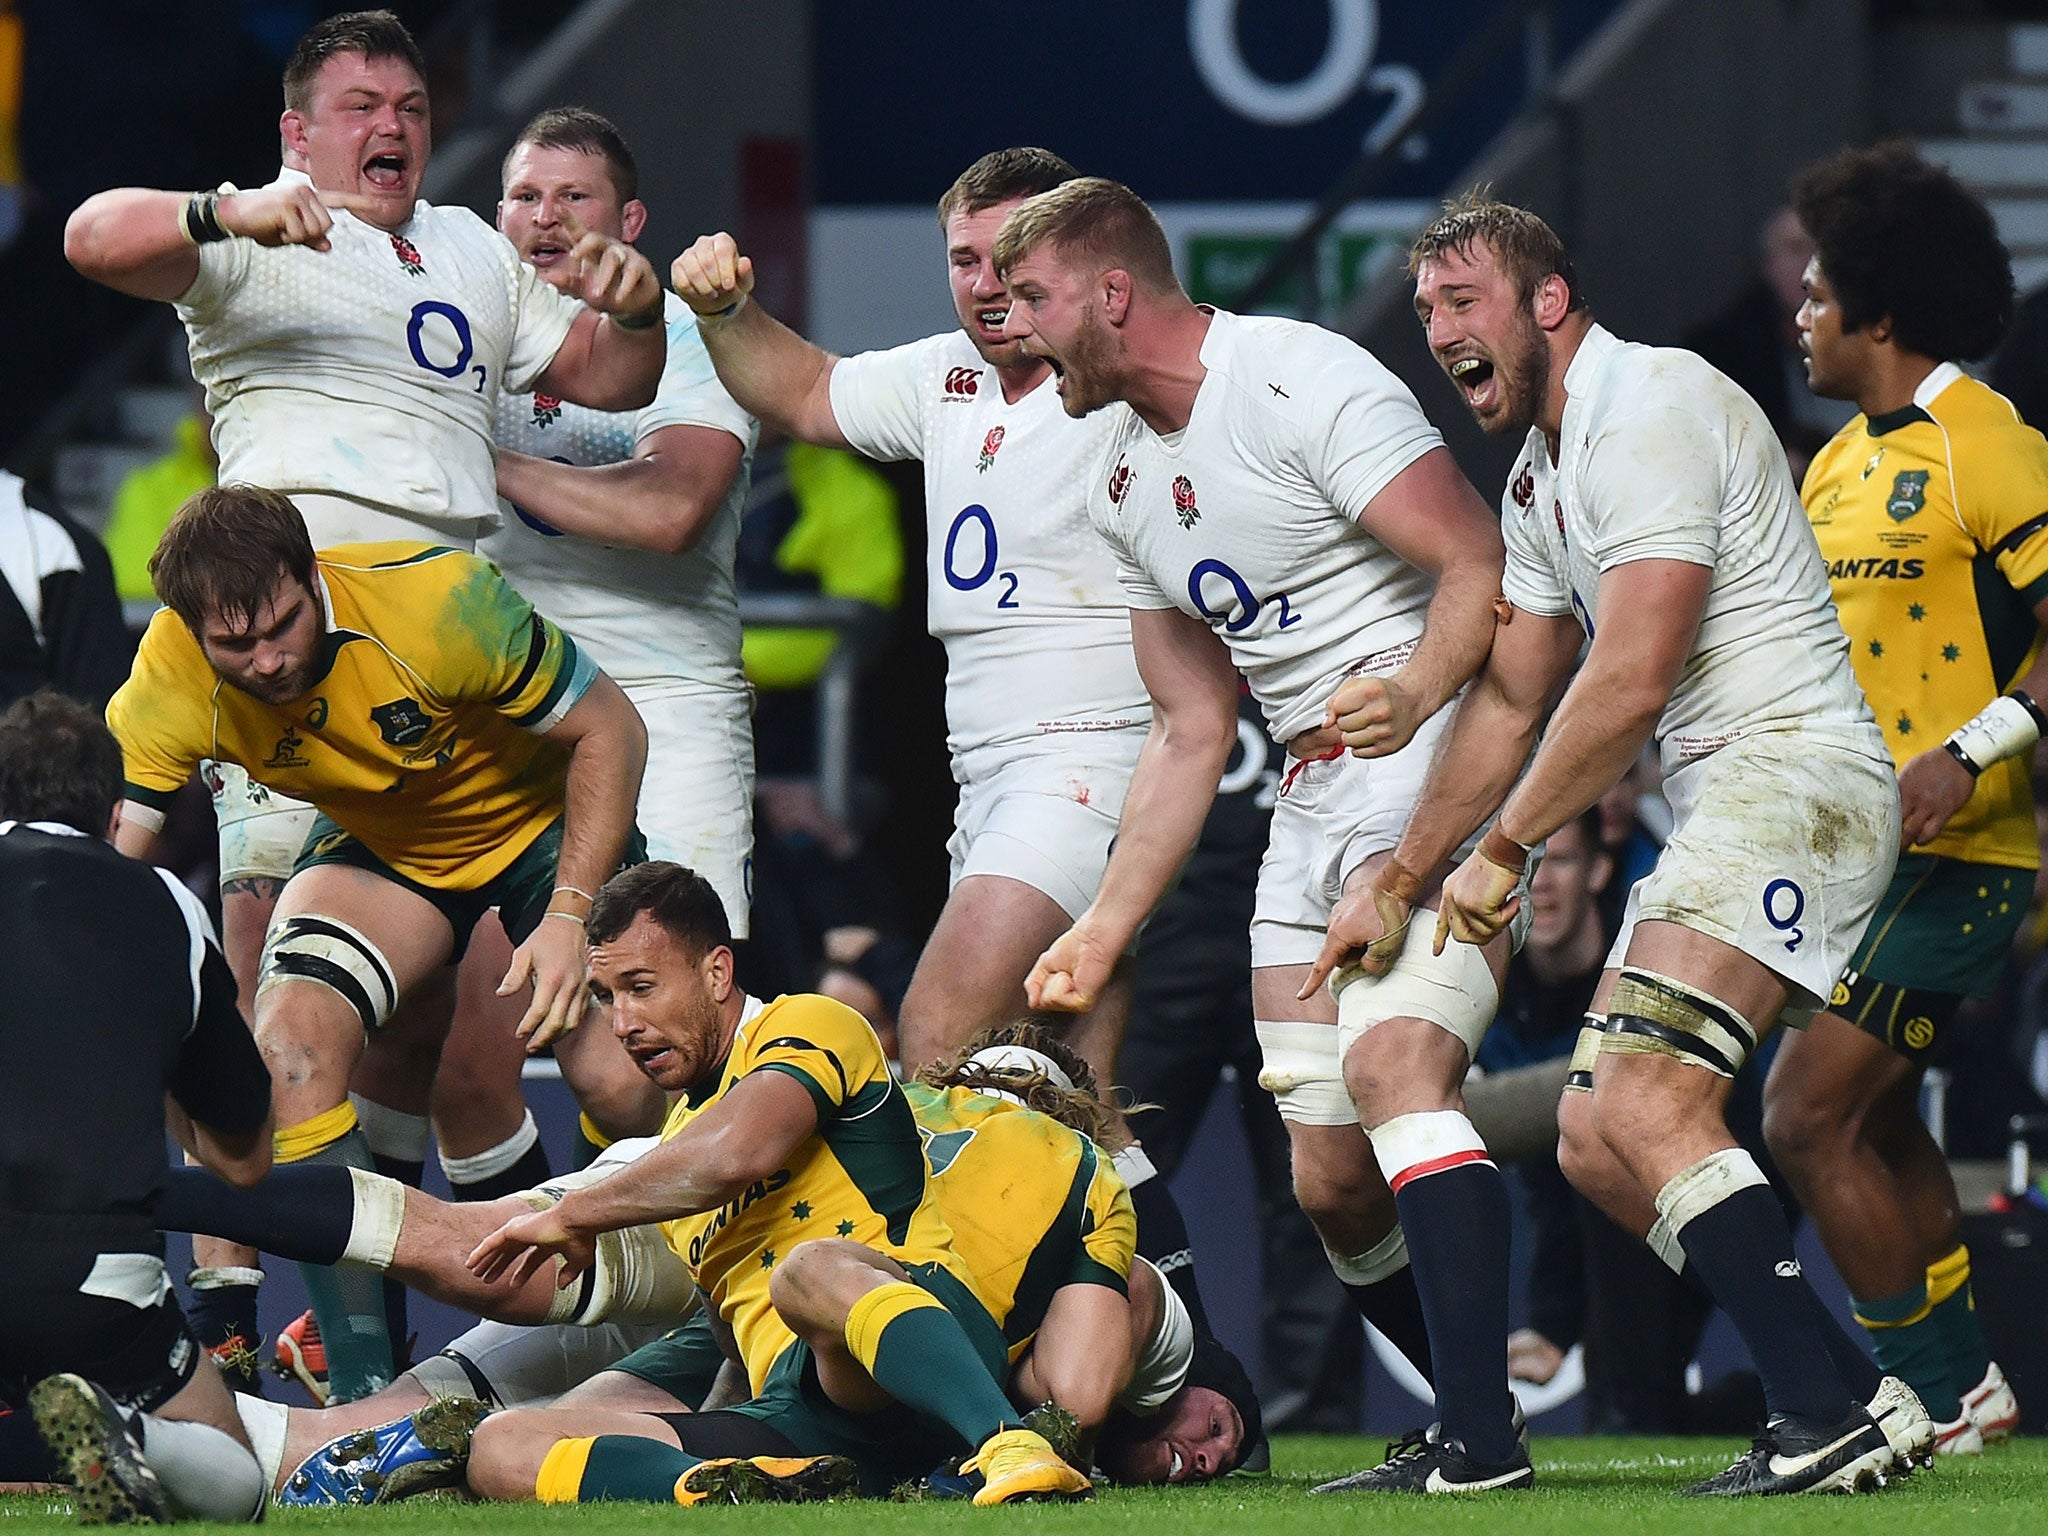 England knows they have to beat Australia to stay in the Rugby World Cup